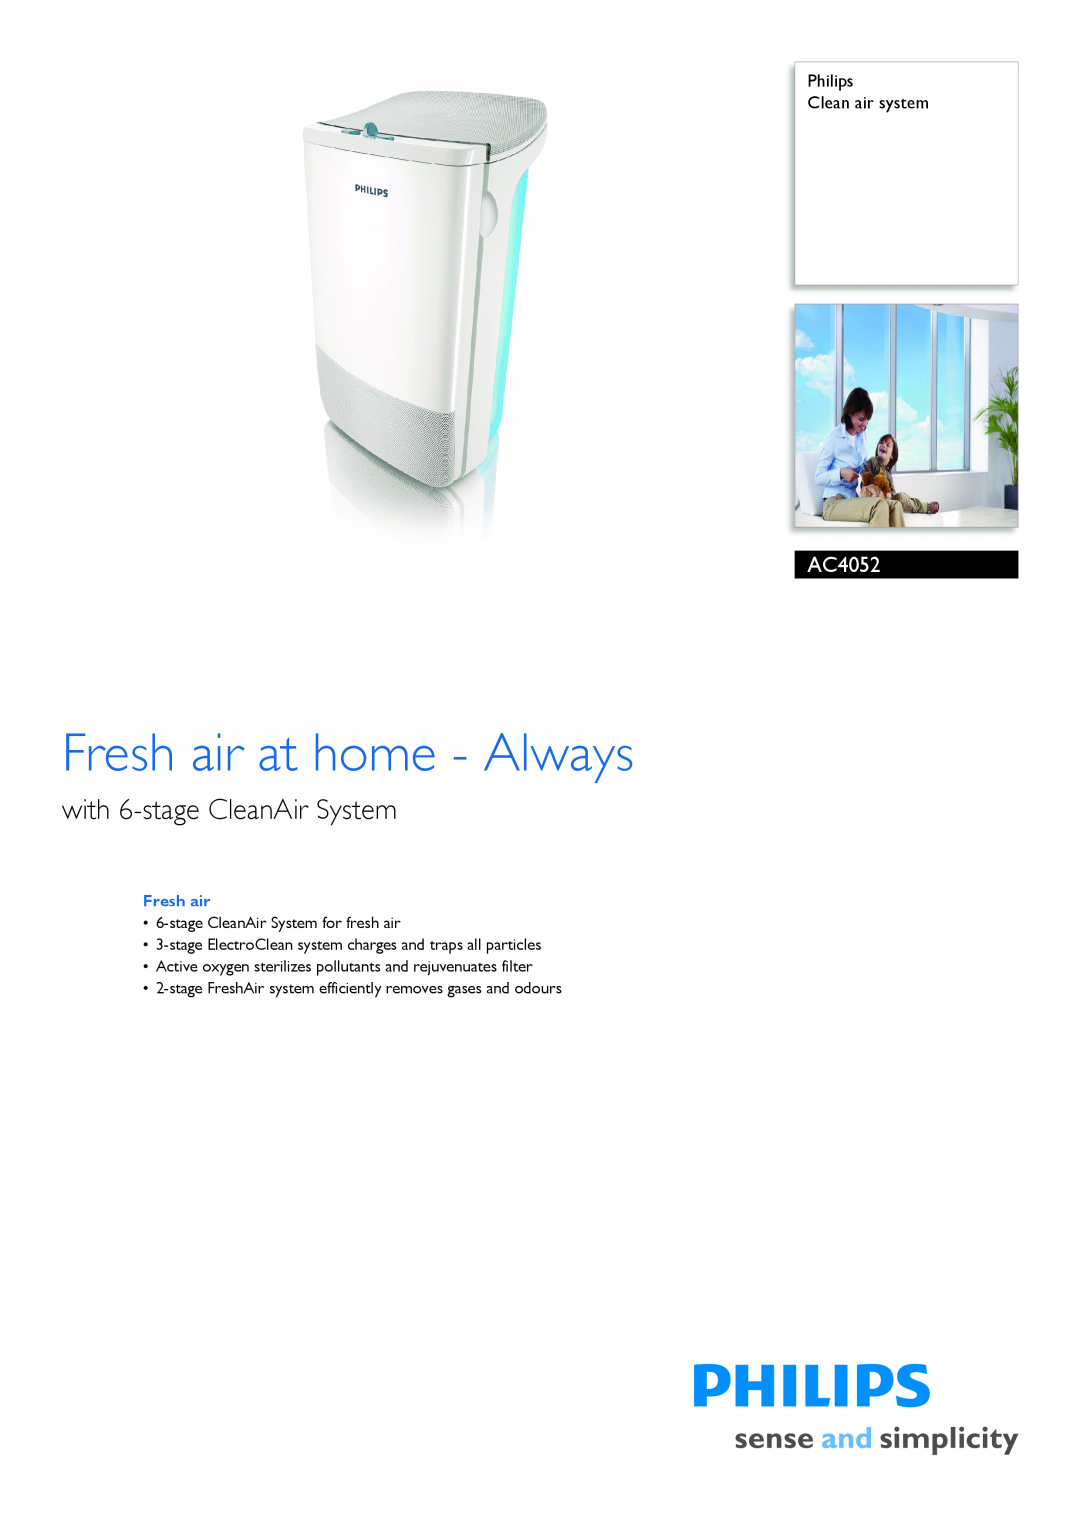 Philips AC4052/00 manual Fresh air at home - Always, with 6-stageCleanAir System, Philips Clean air system 